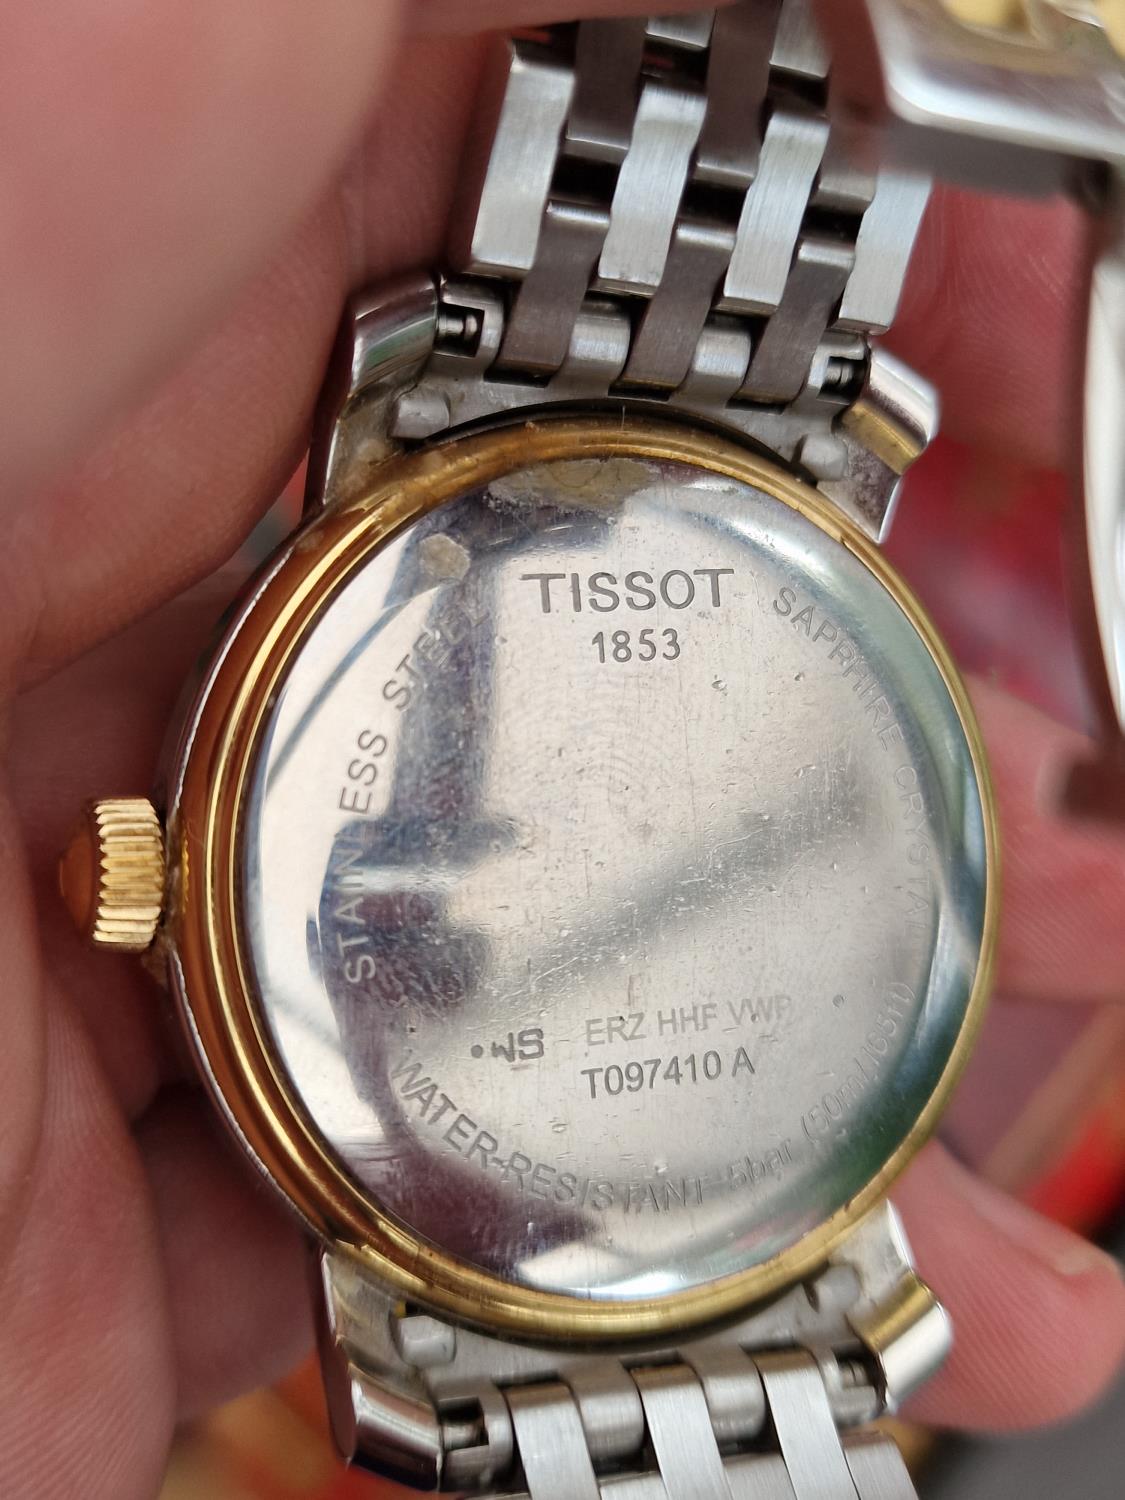 Pair of Swiss-Made Tissot Watches - Image 3 of 4